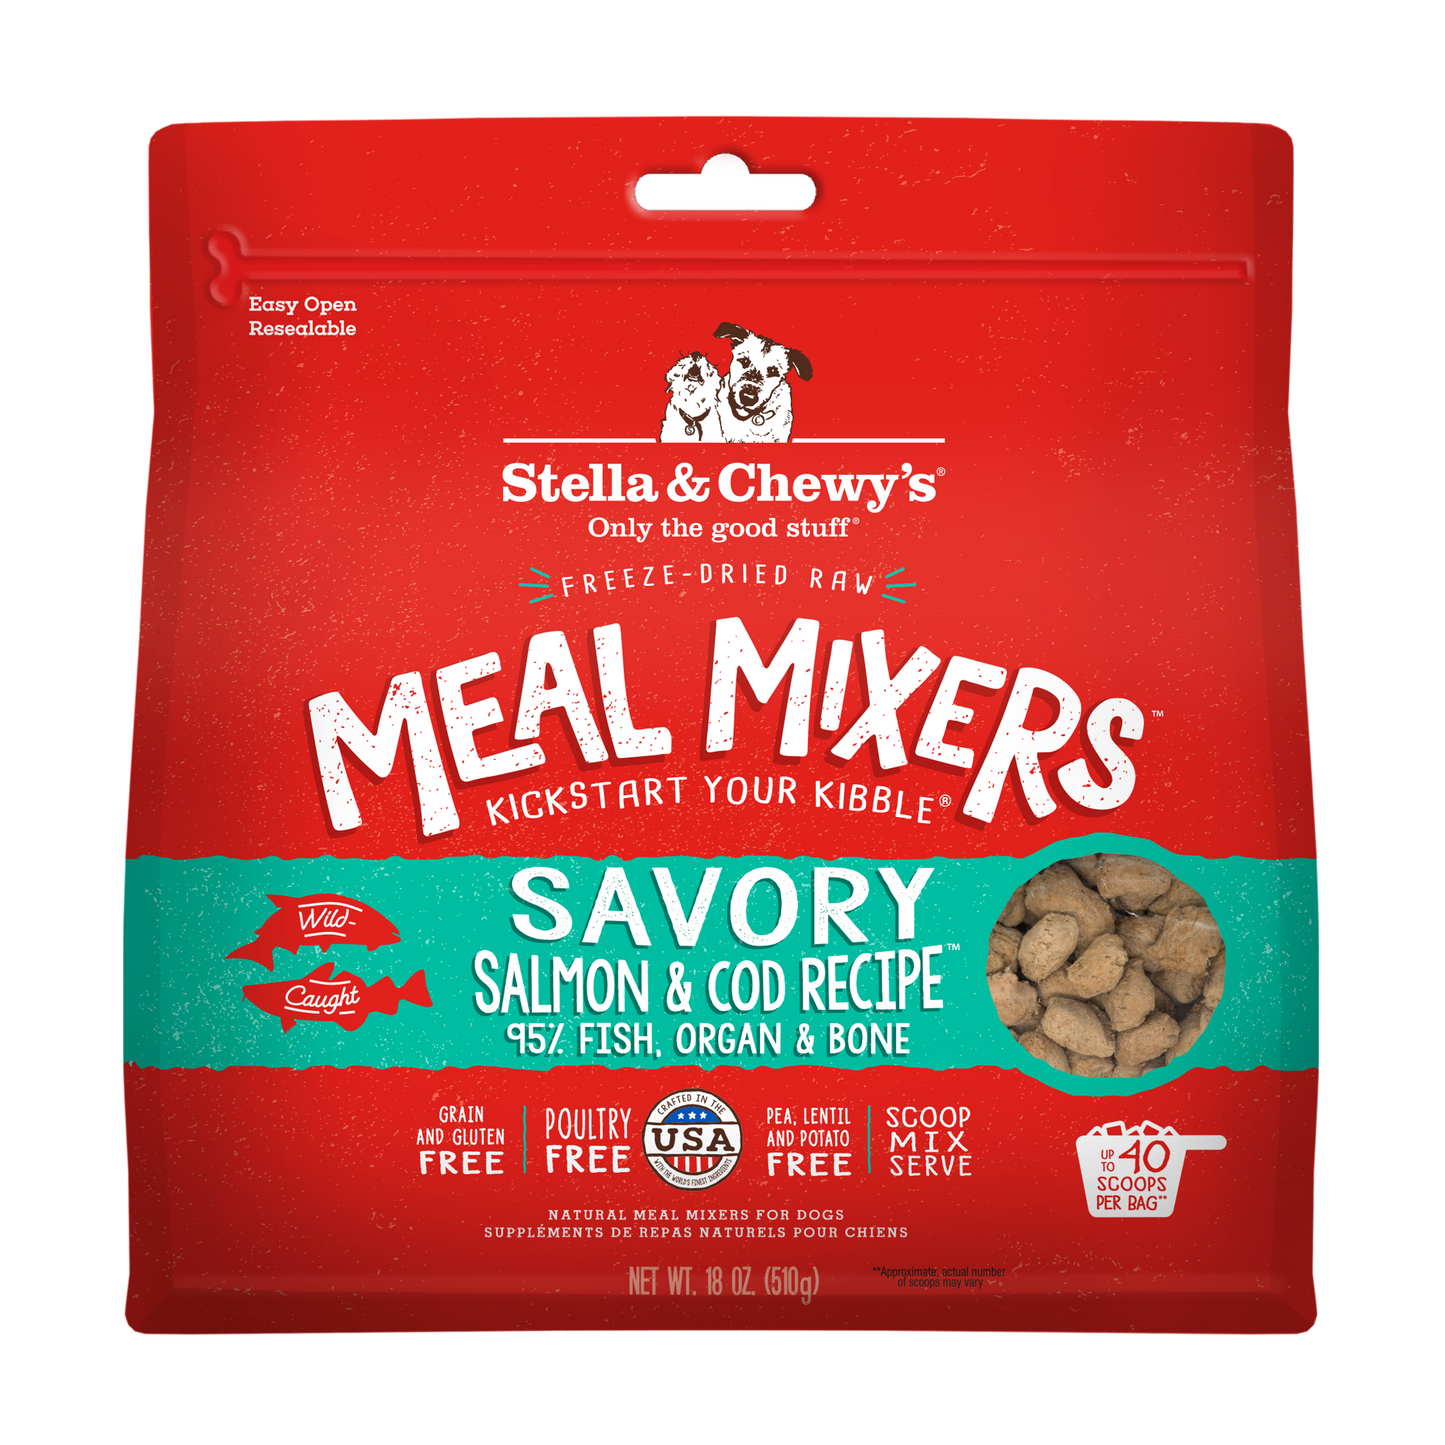 Stella & Chewy's Freeze-Dried Meal Mixers Savory Salmon & Cod